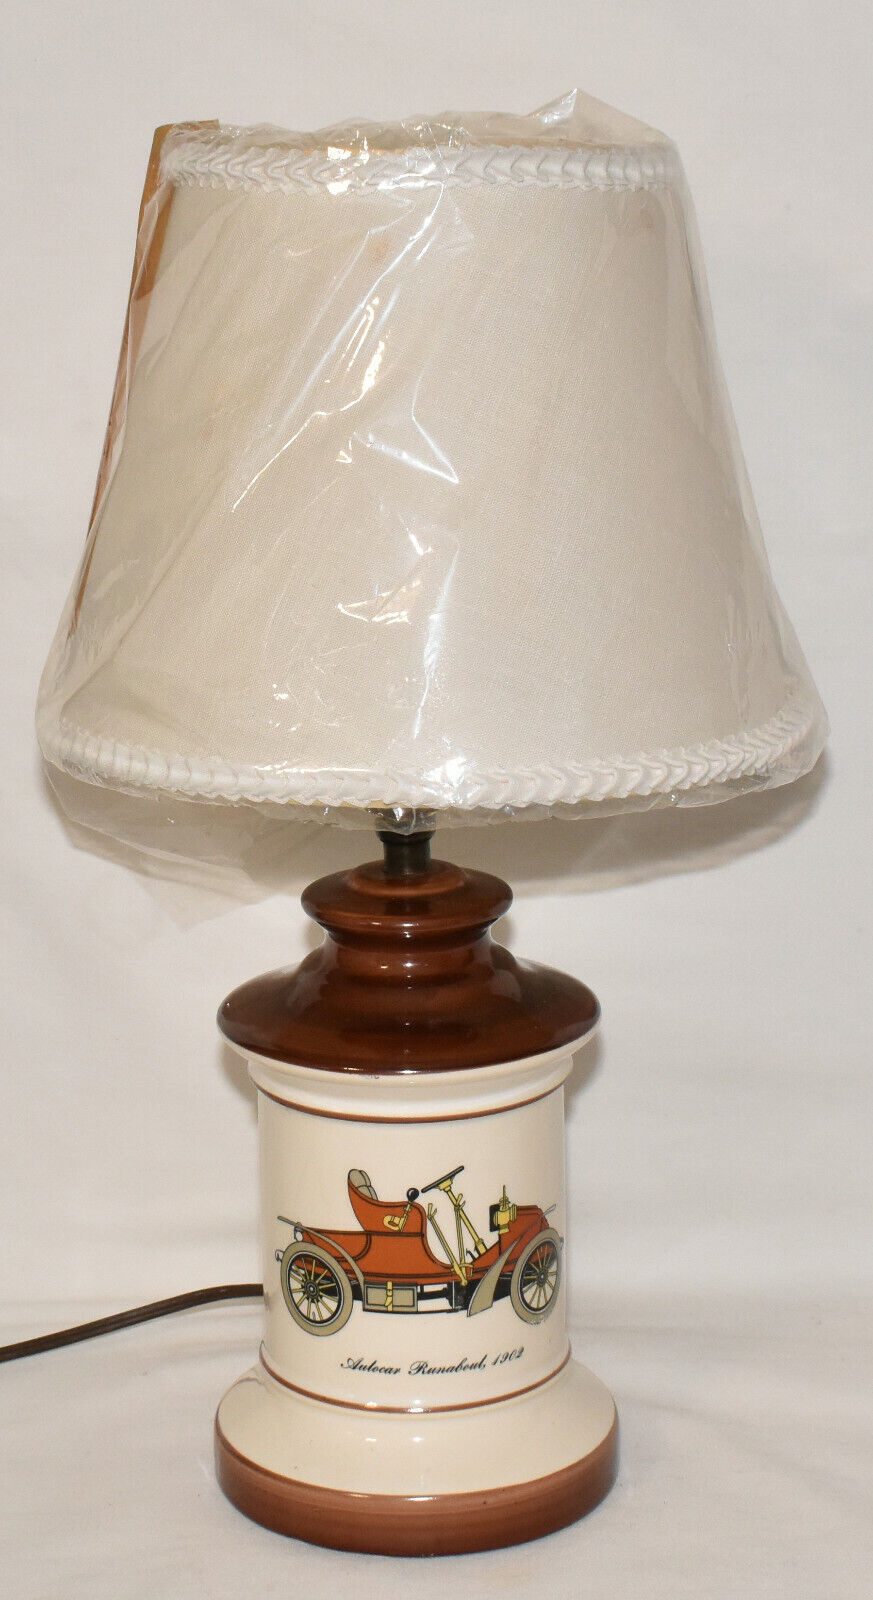 Vintage Table Desk Lamp with Shade Brown White Autocar Runabout 1902 Graphics